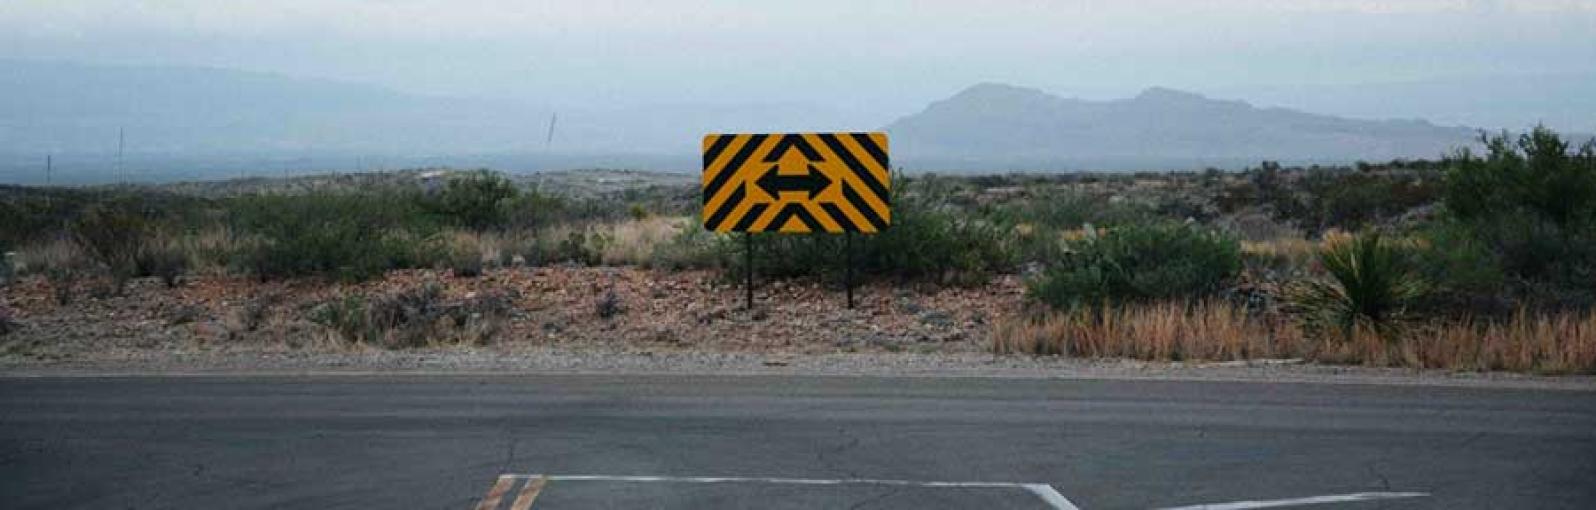 A sign on a roadside pointing in two directions